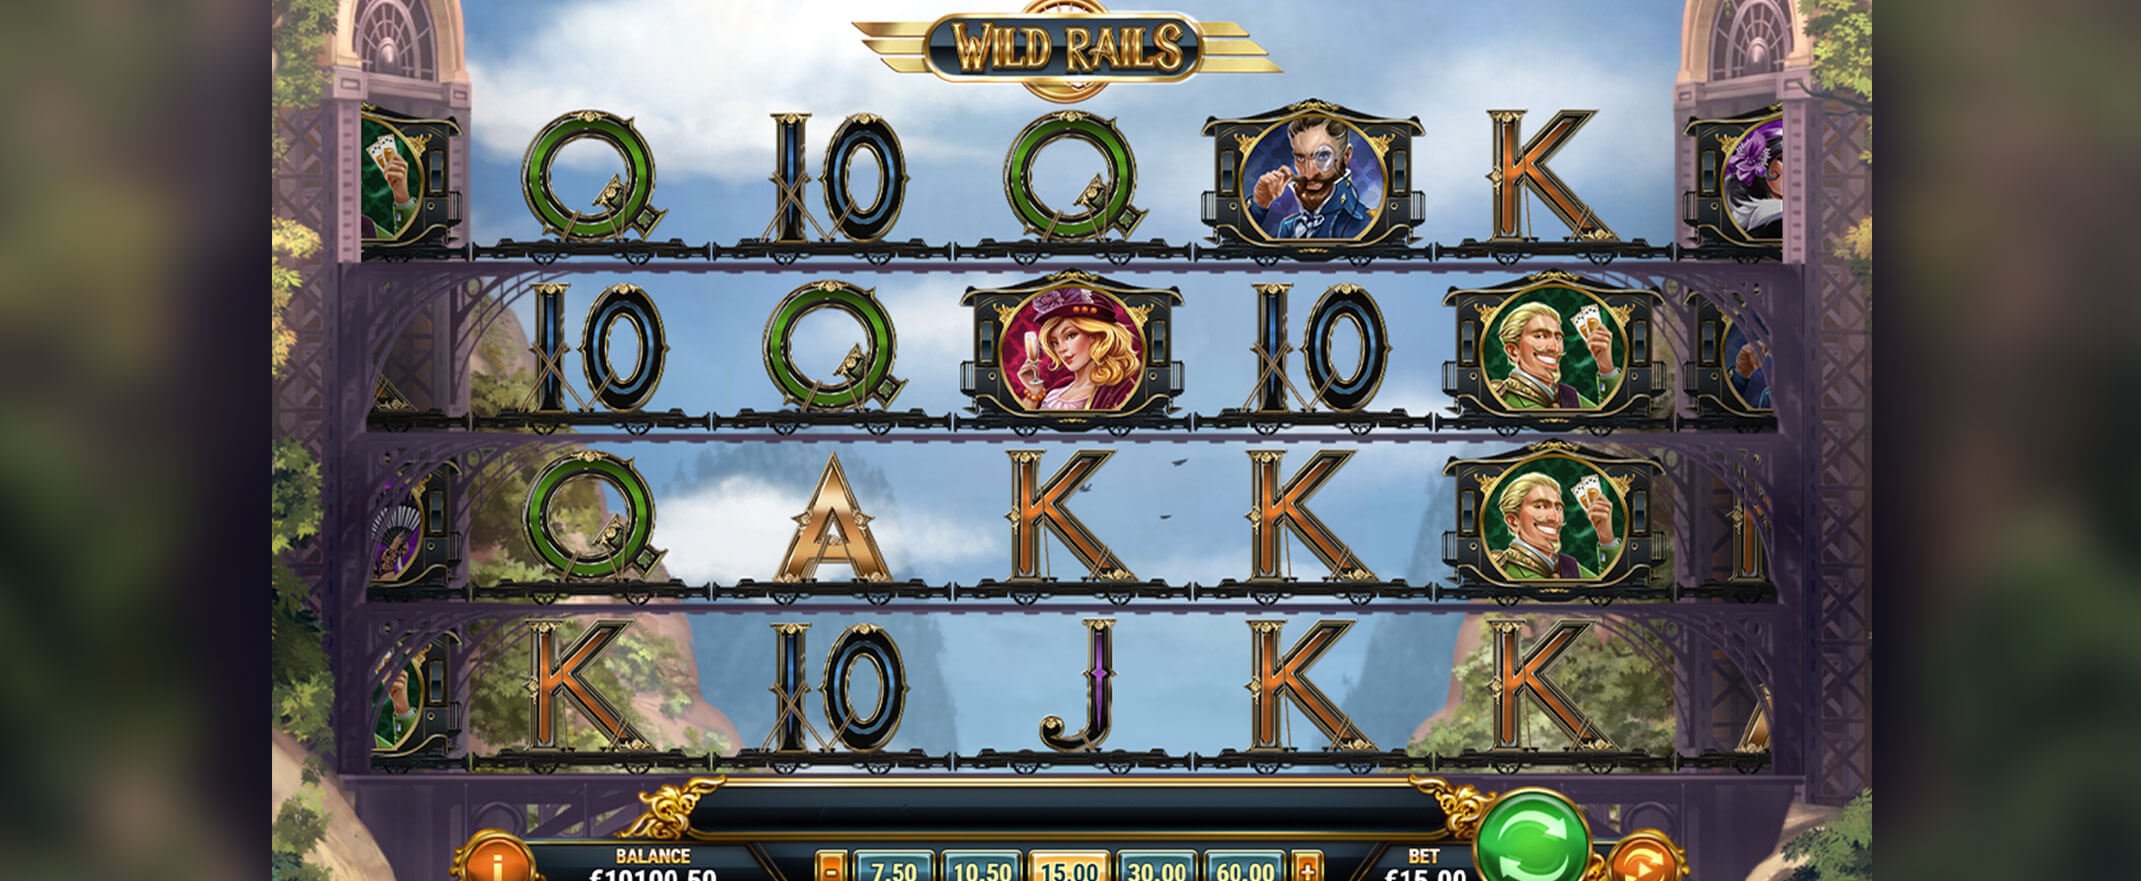 Wild Rails slot from Play N Go